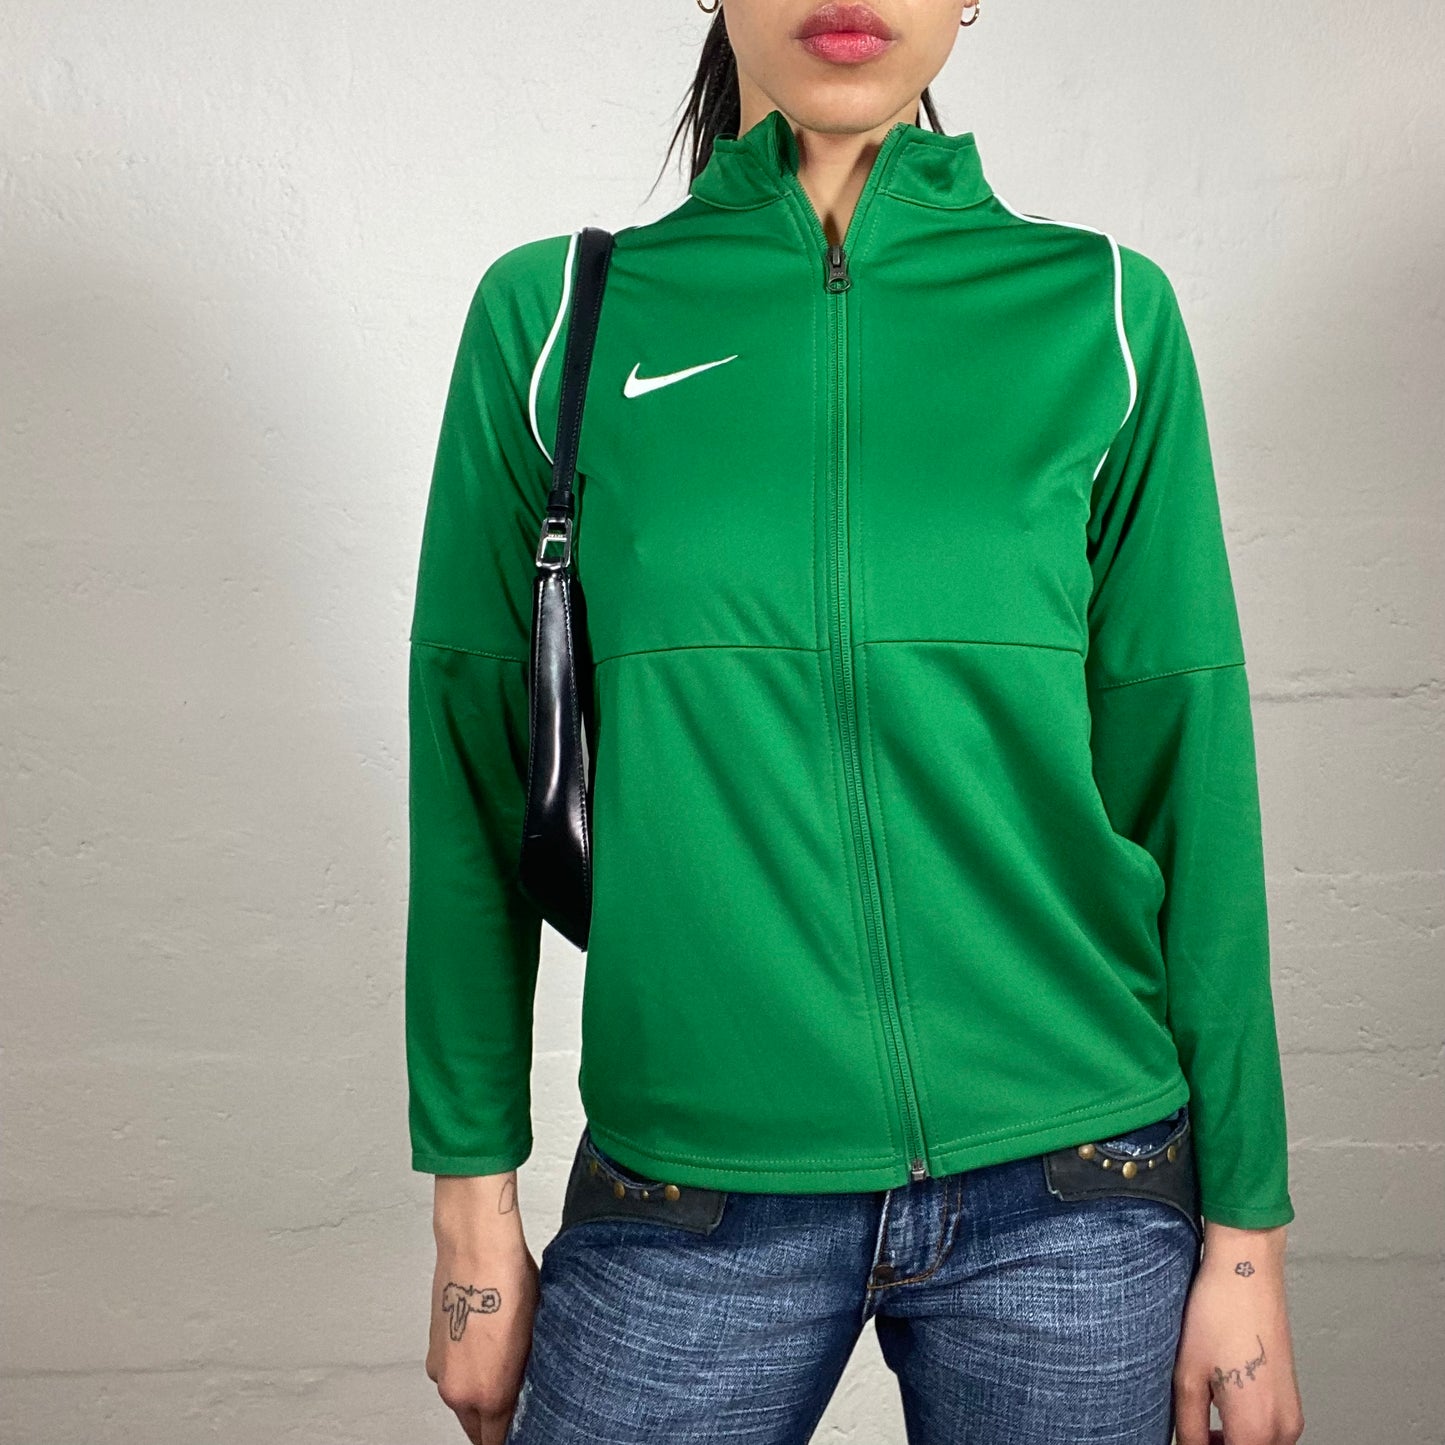 Vintage 2000's Archive Nike Sporty Green Zip Up Pullover with White Logo Print (L)